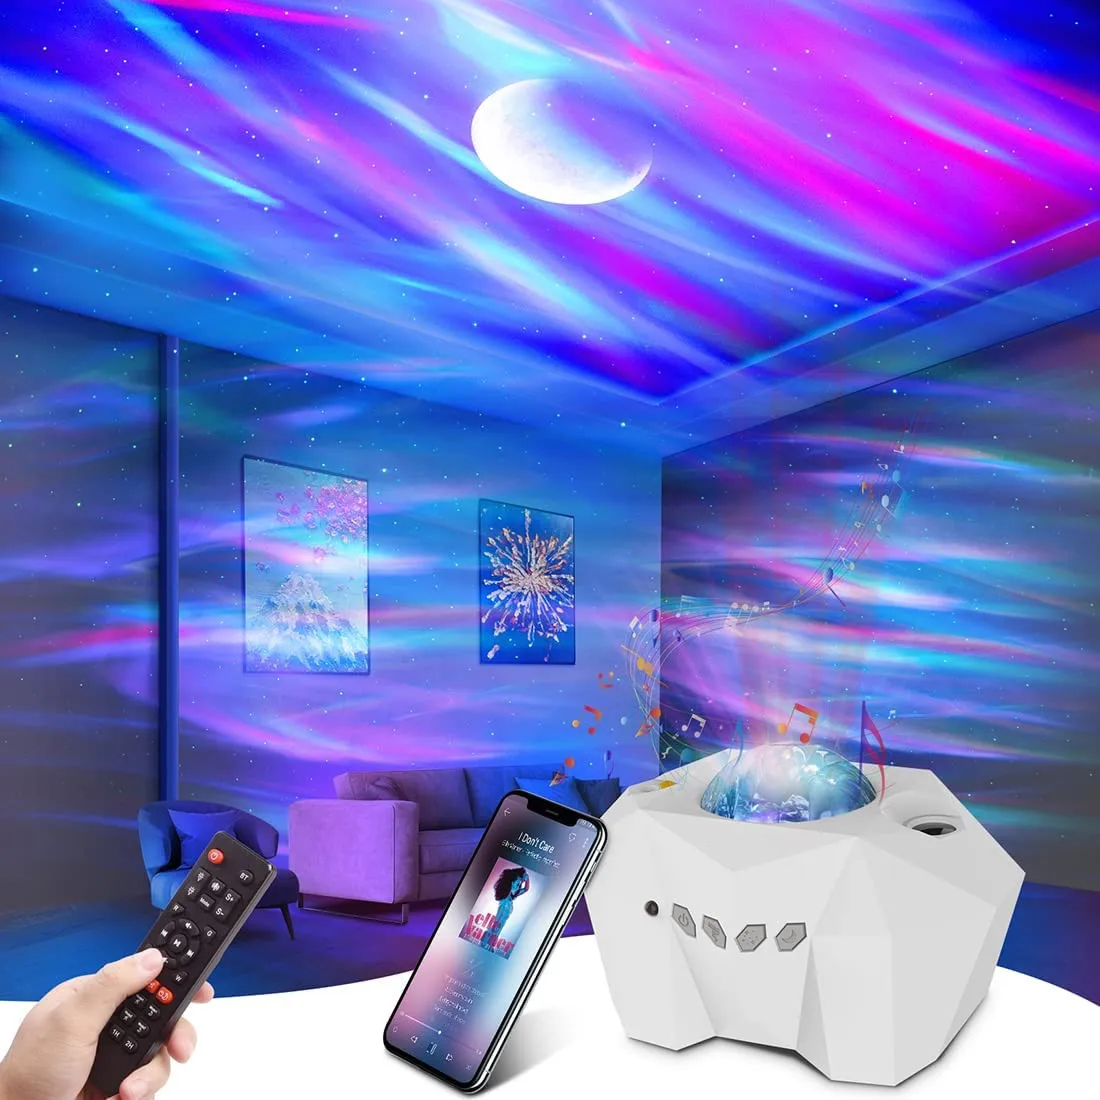 

VIP Link LED Aurora Projector Galaxy Starry Sky Projector Lamp